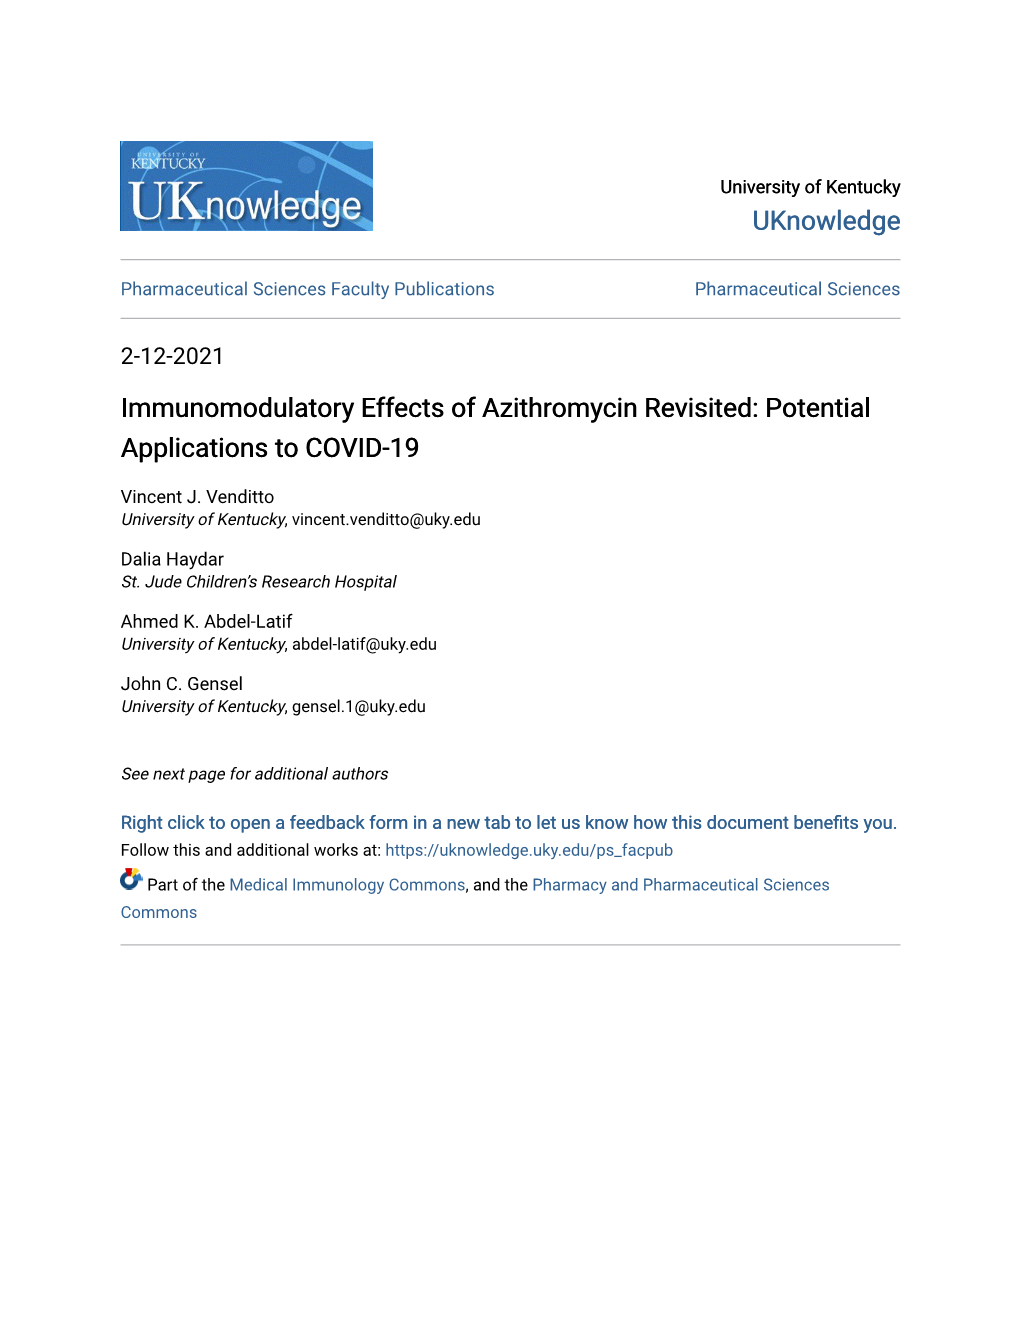 Immunomodulatory Effects of Azithromycin Revisited: Potential Applications to COVID-19